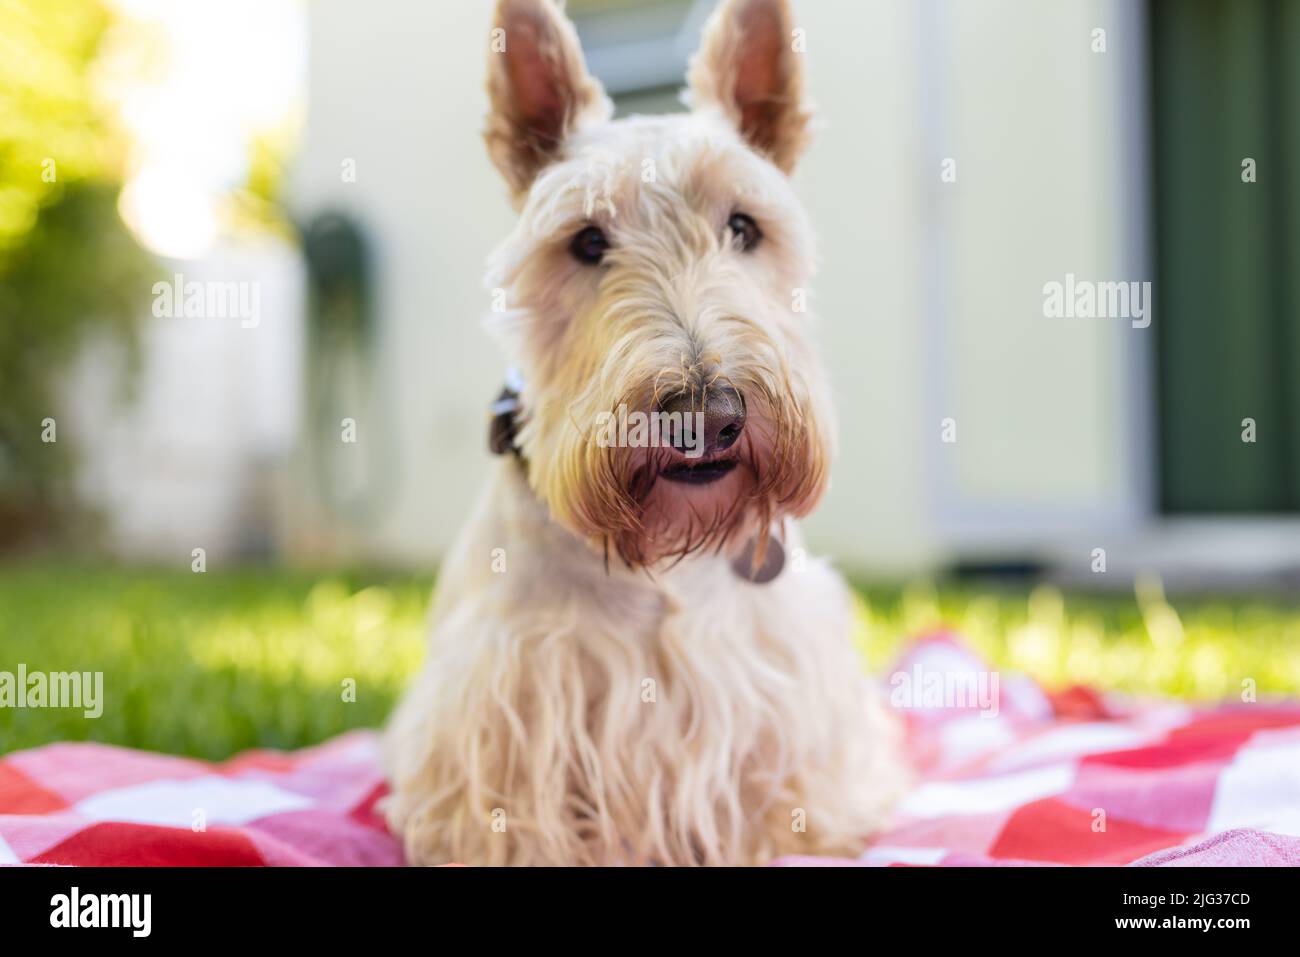 Portrait of white scottish terrier sitting on checked patterned blanket against house in yard Stock Photo